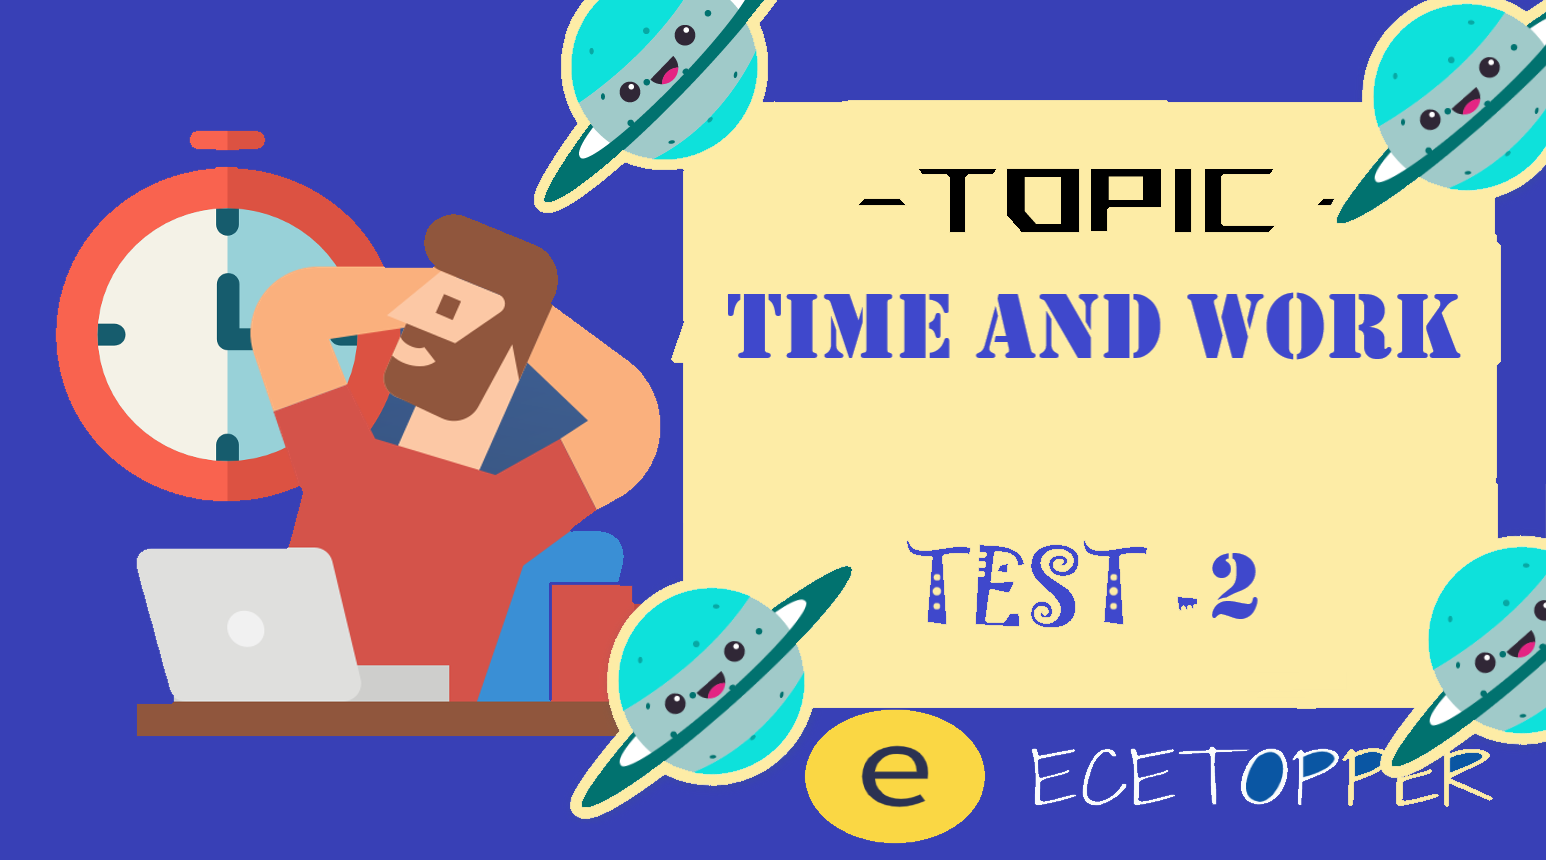 Aptitude MCQ TEST With Solutions And Explanations Topic Time And Work Test 2